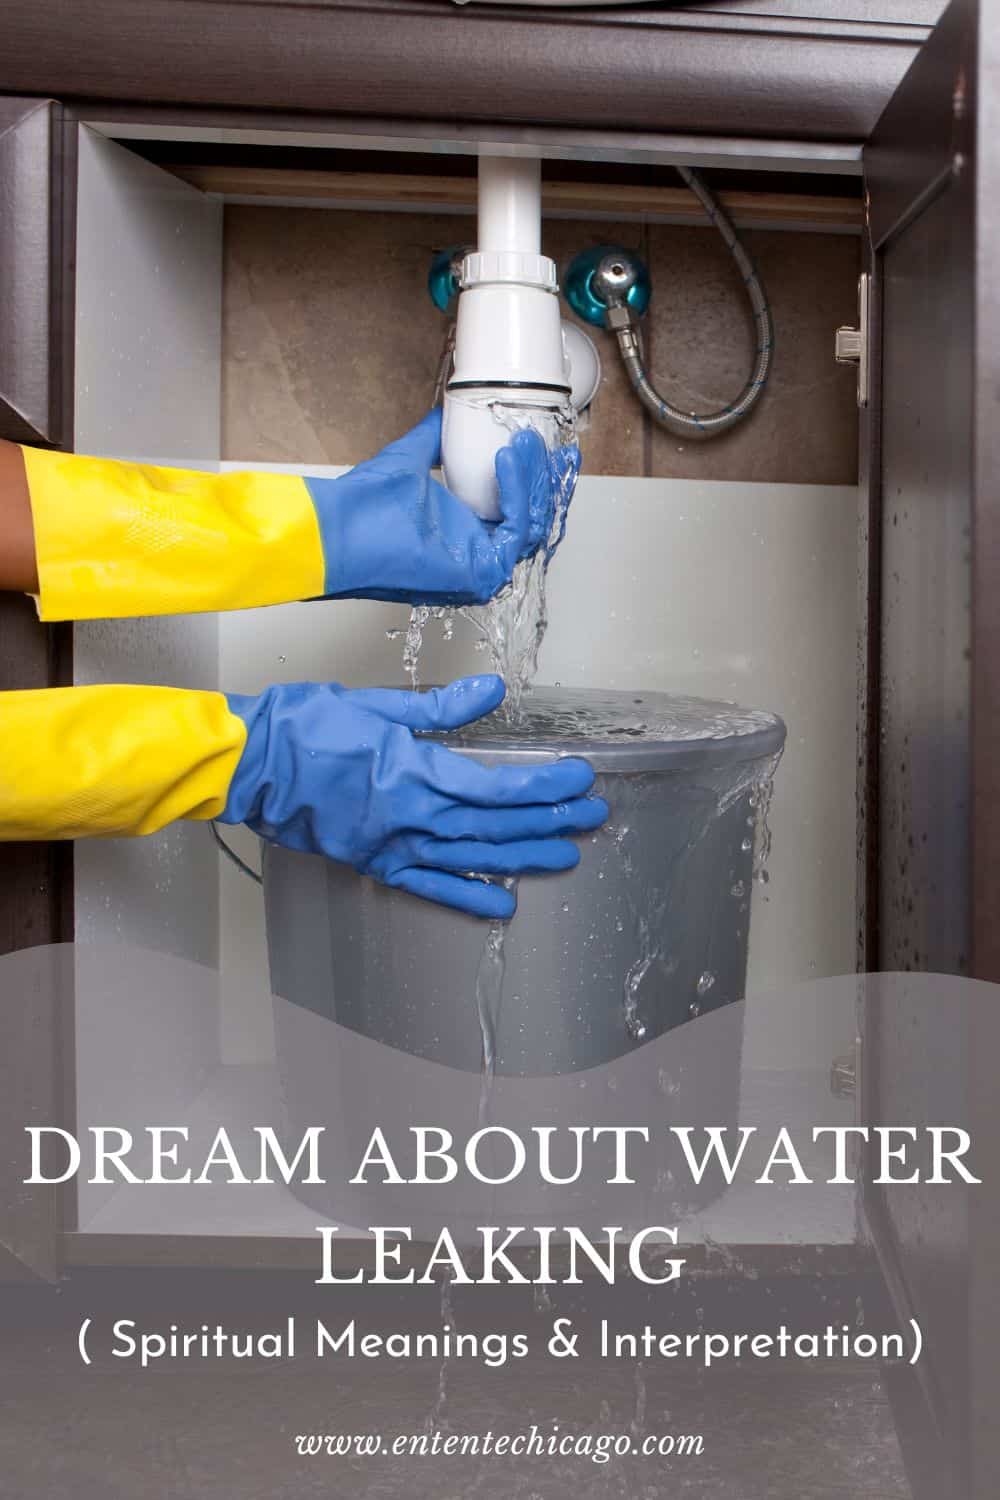 What does a dream about water leaking mean